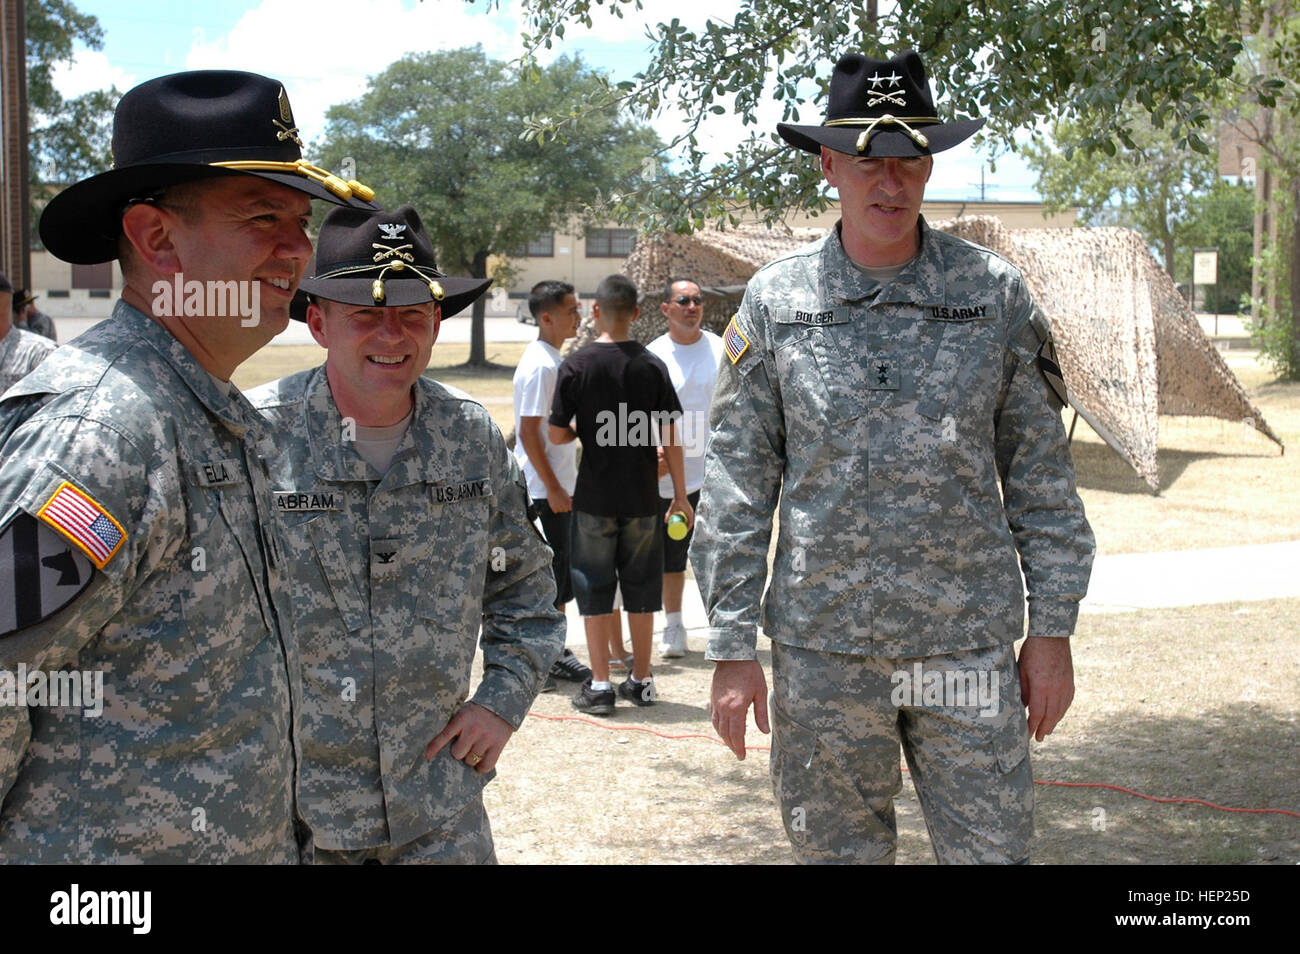 Major Daniel Bolger (right), the commanding general for 1st Cavalry Division, talks with Col. Douglas Gabram (center), commander the 1st Air Cavalry "Warrior" Brigade, 1st Cav. Div., and Command